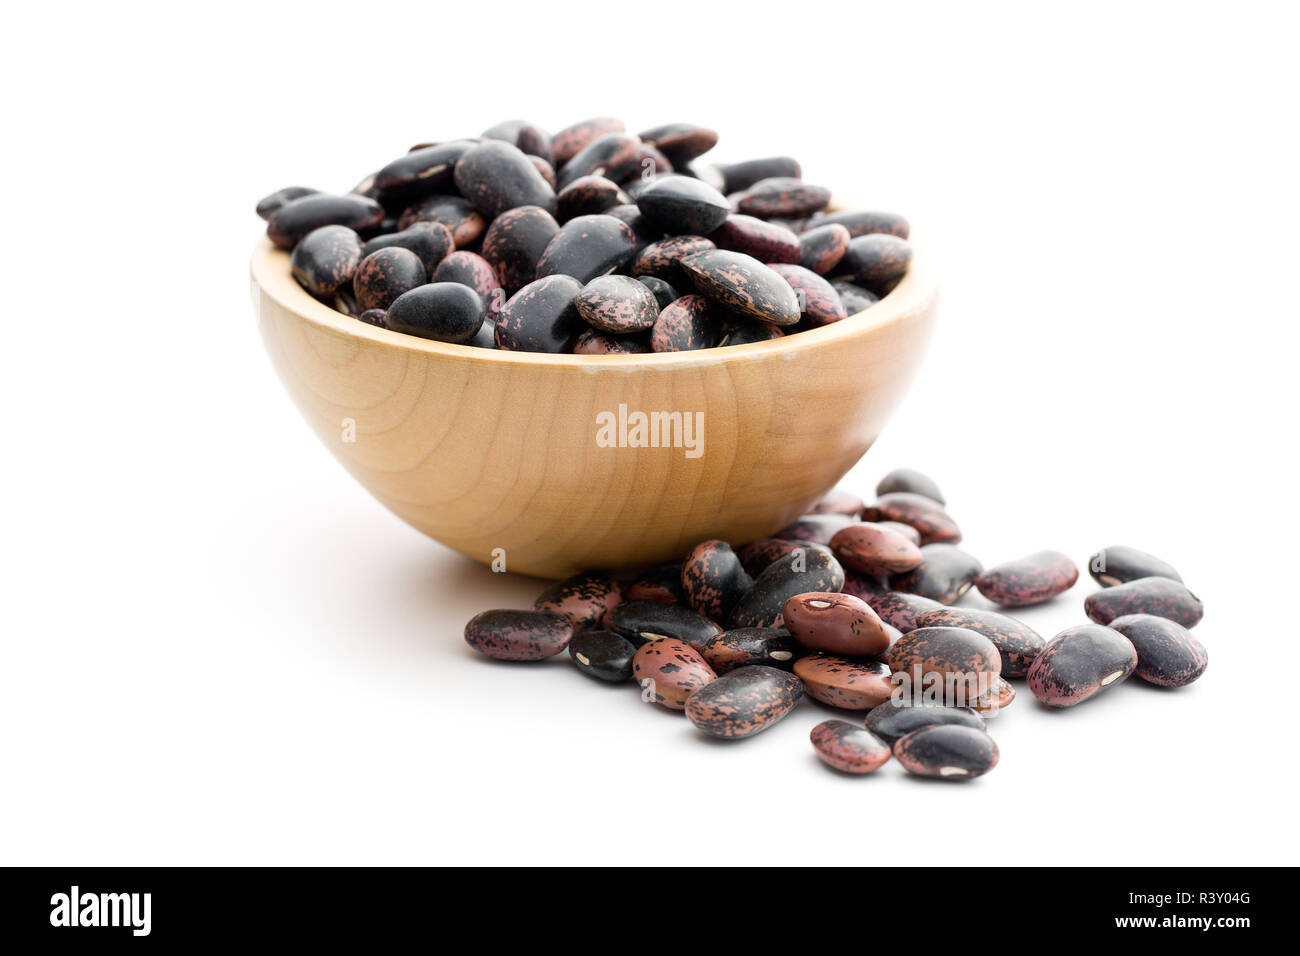 Dried peas in wooden bowl Cut Out Stock Images & Pictures - Alamy